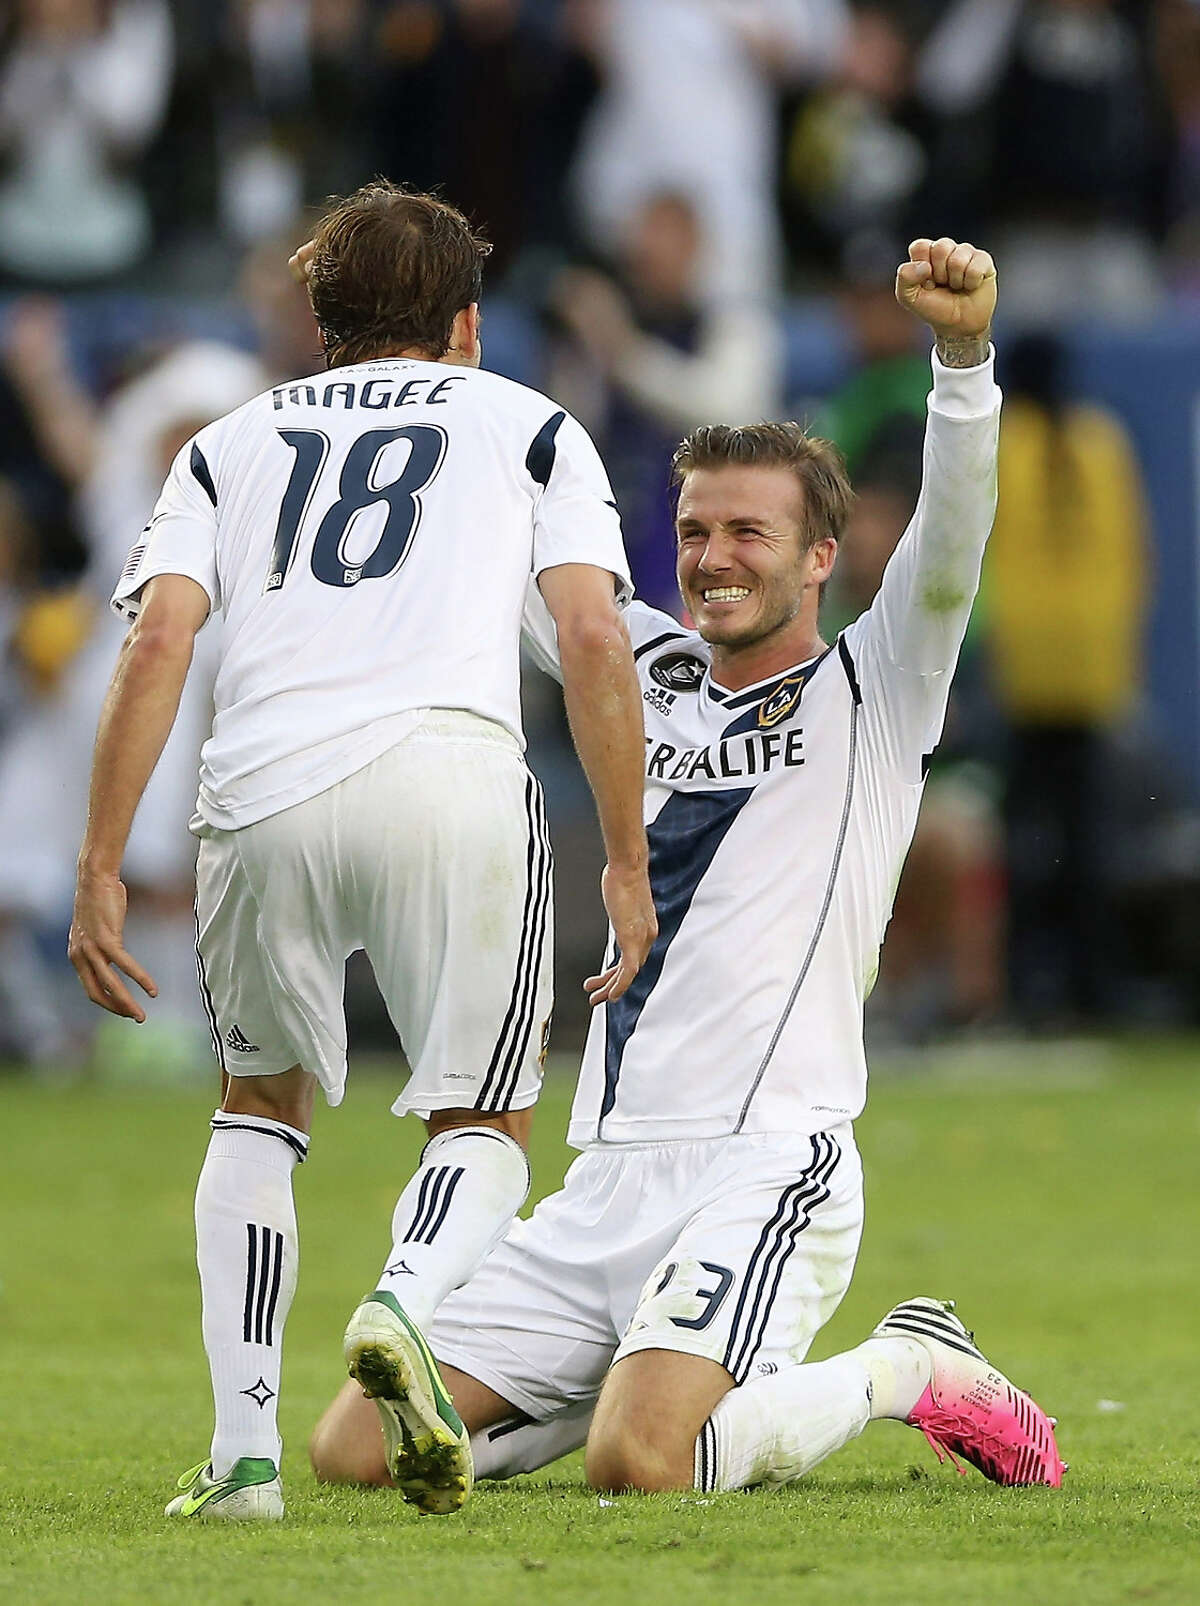 David Beckham #23 and Mike Magee #18 of Los Angeles Galaxy celebrate in the second half against the Houston Dynamo in the 2012 MLS Cup at The Home Depot Center on December 1, 2012 in Carson, California.